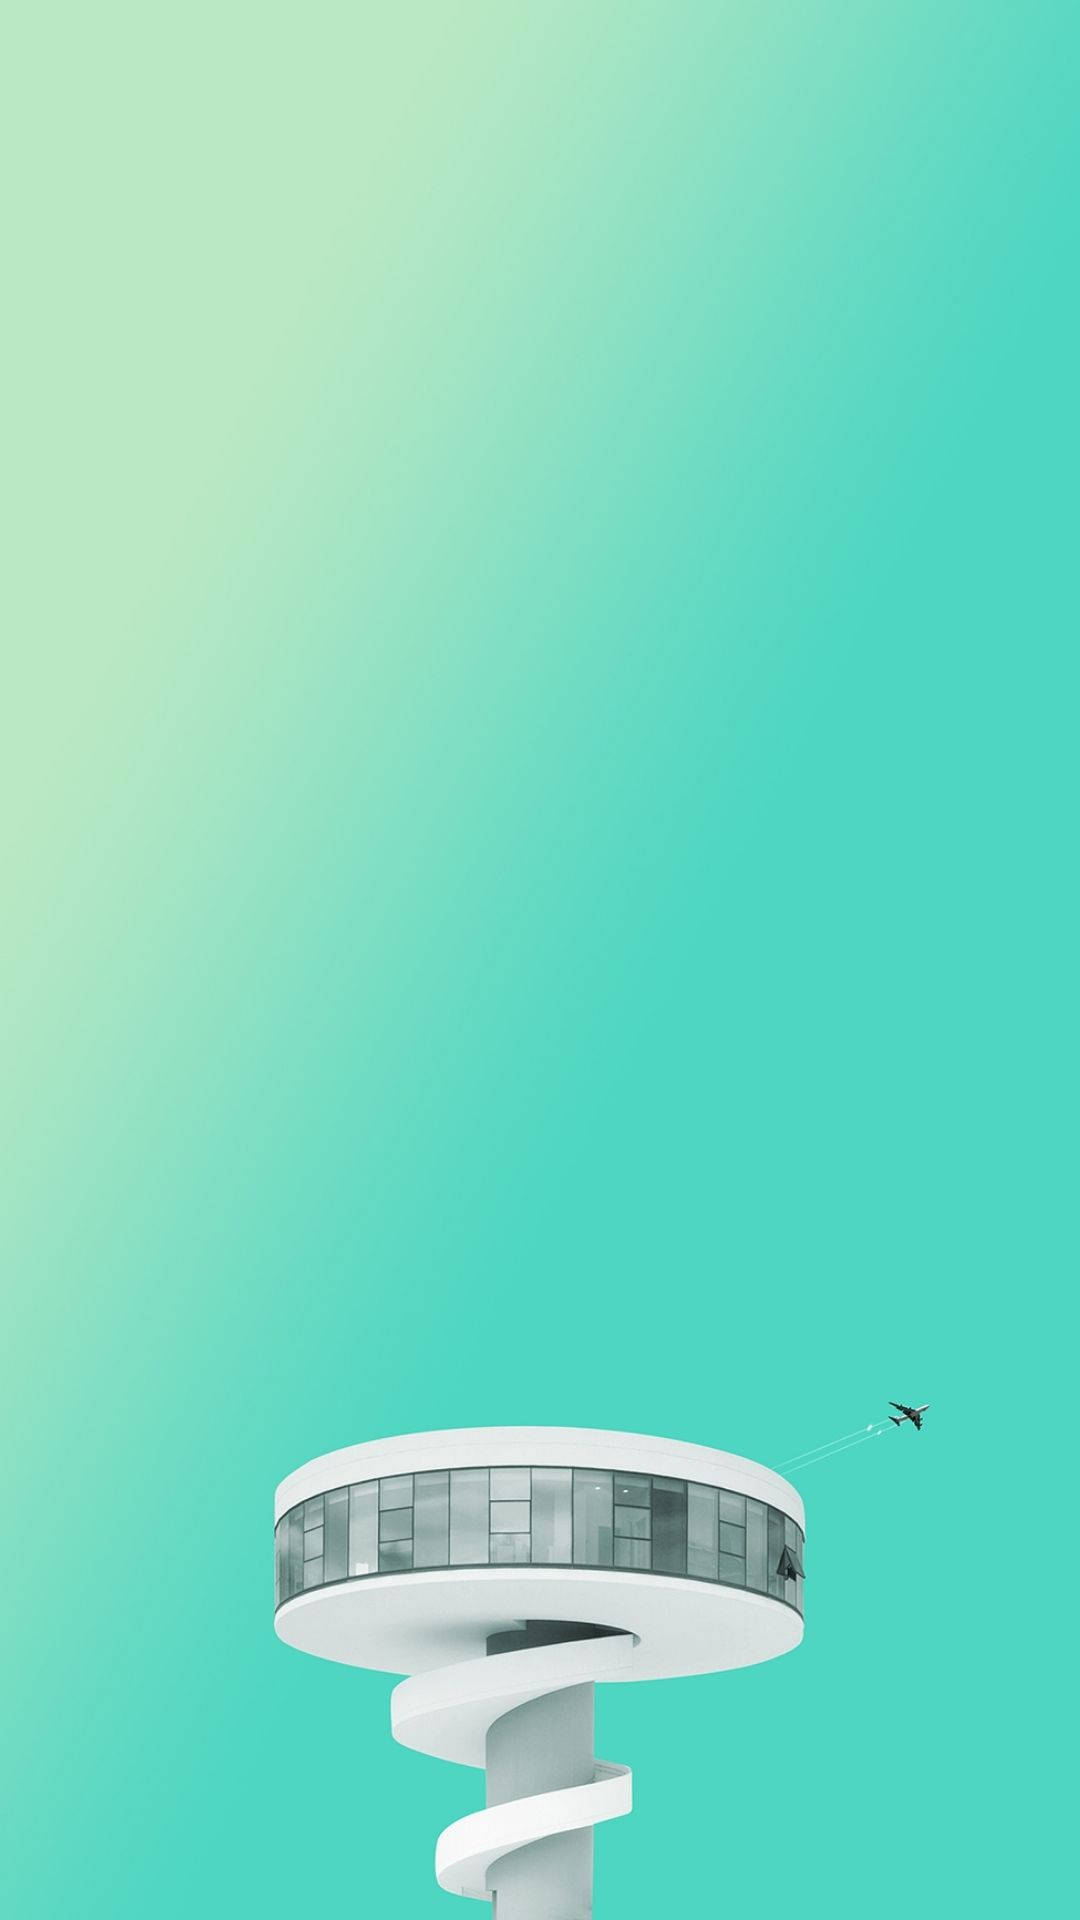 Minimal 1080X1920 Wallpaper and Background Image